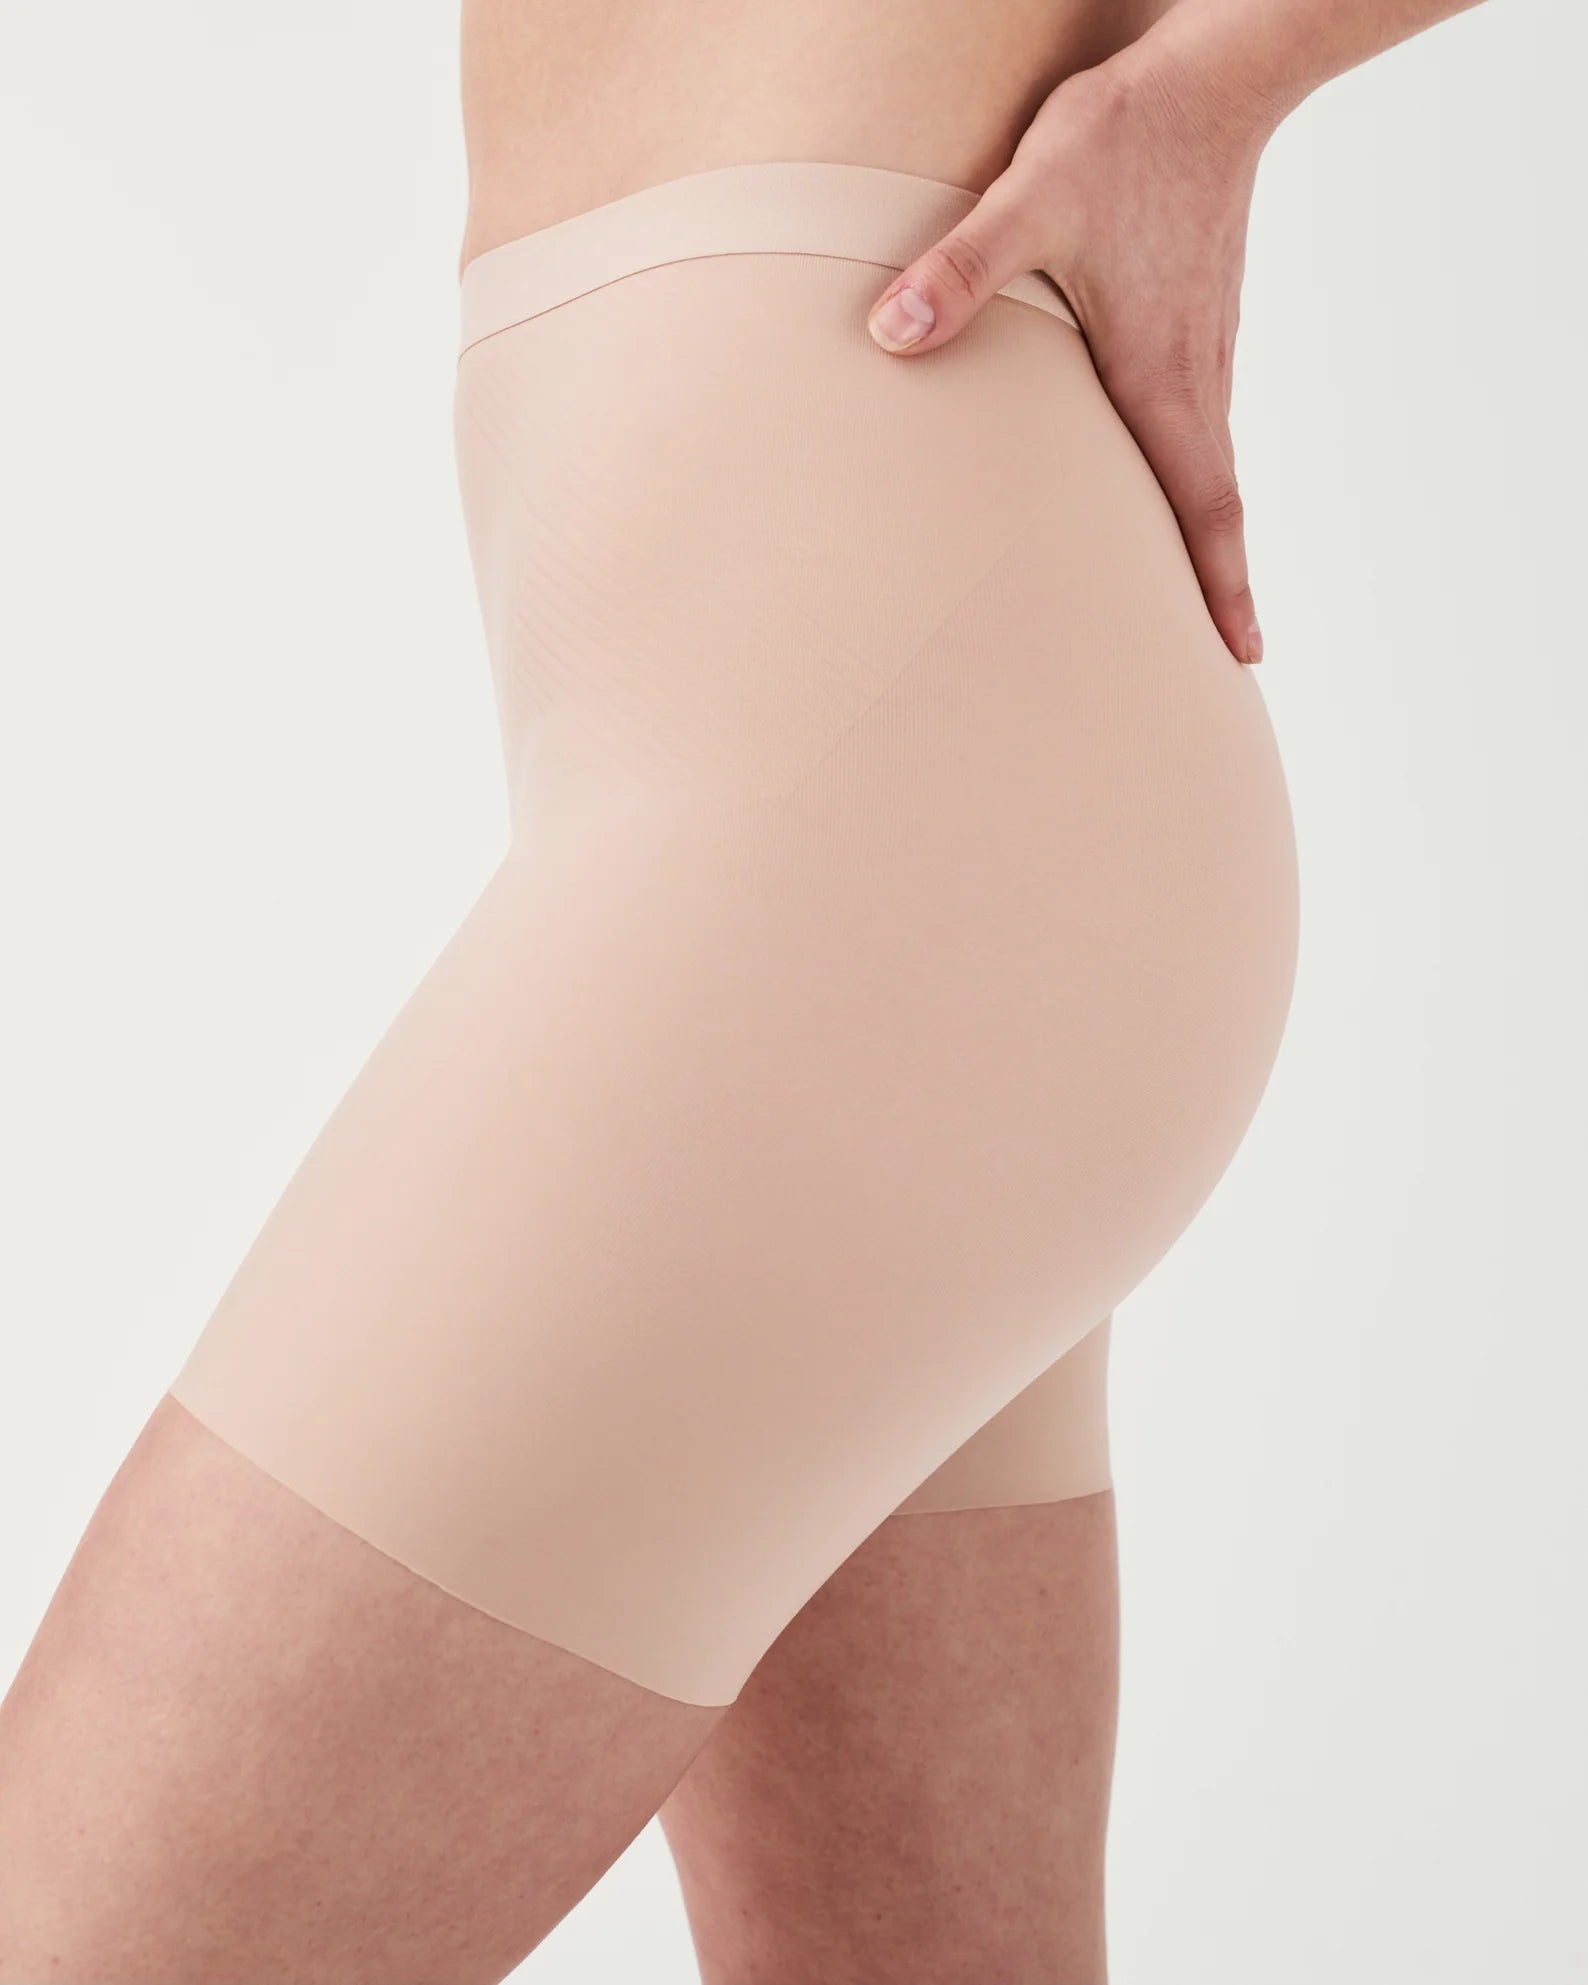 Invisible Shaping Girlshort - Champagne Beige